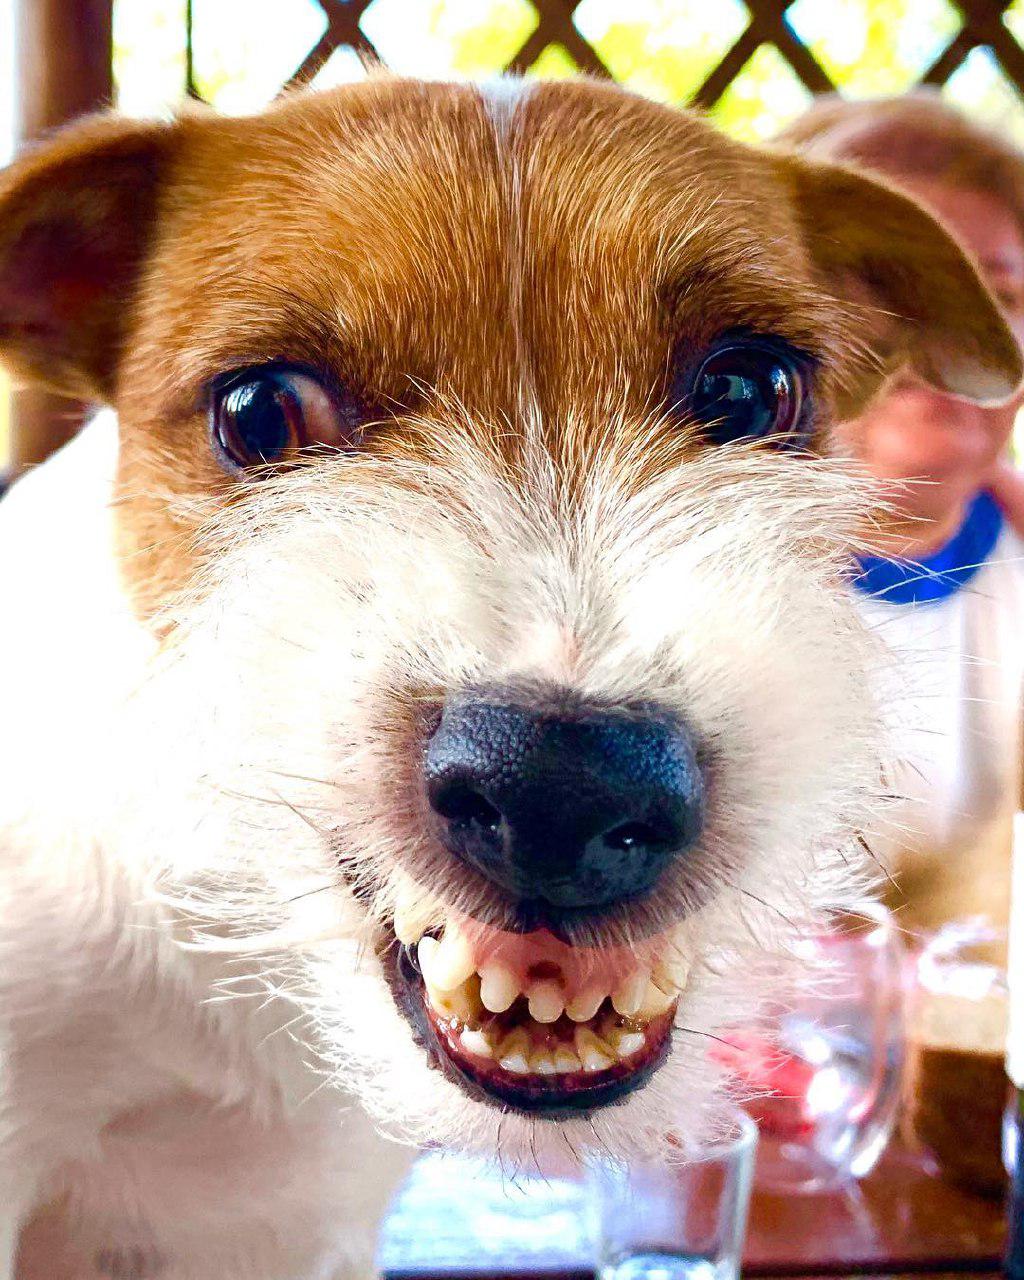 Jack Russell force smiling with its full teeth